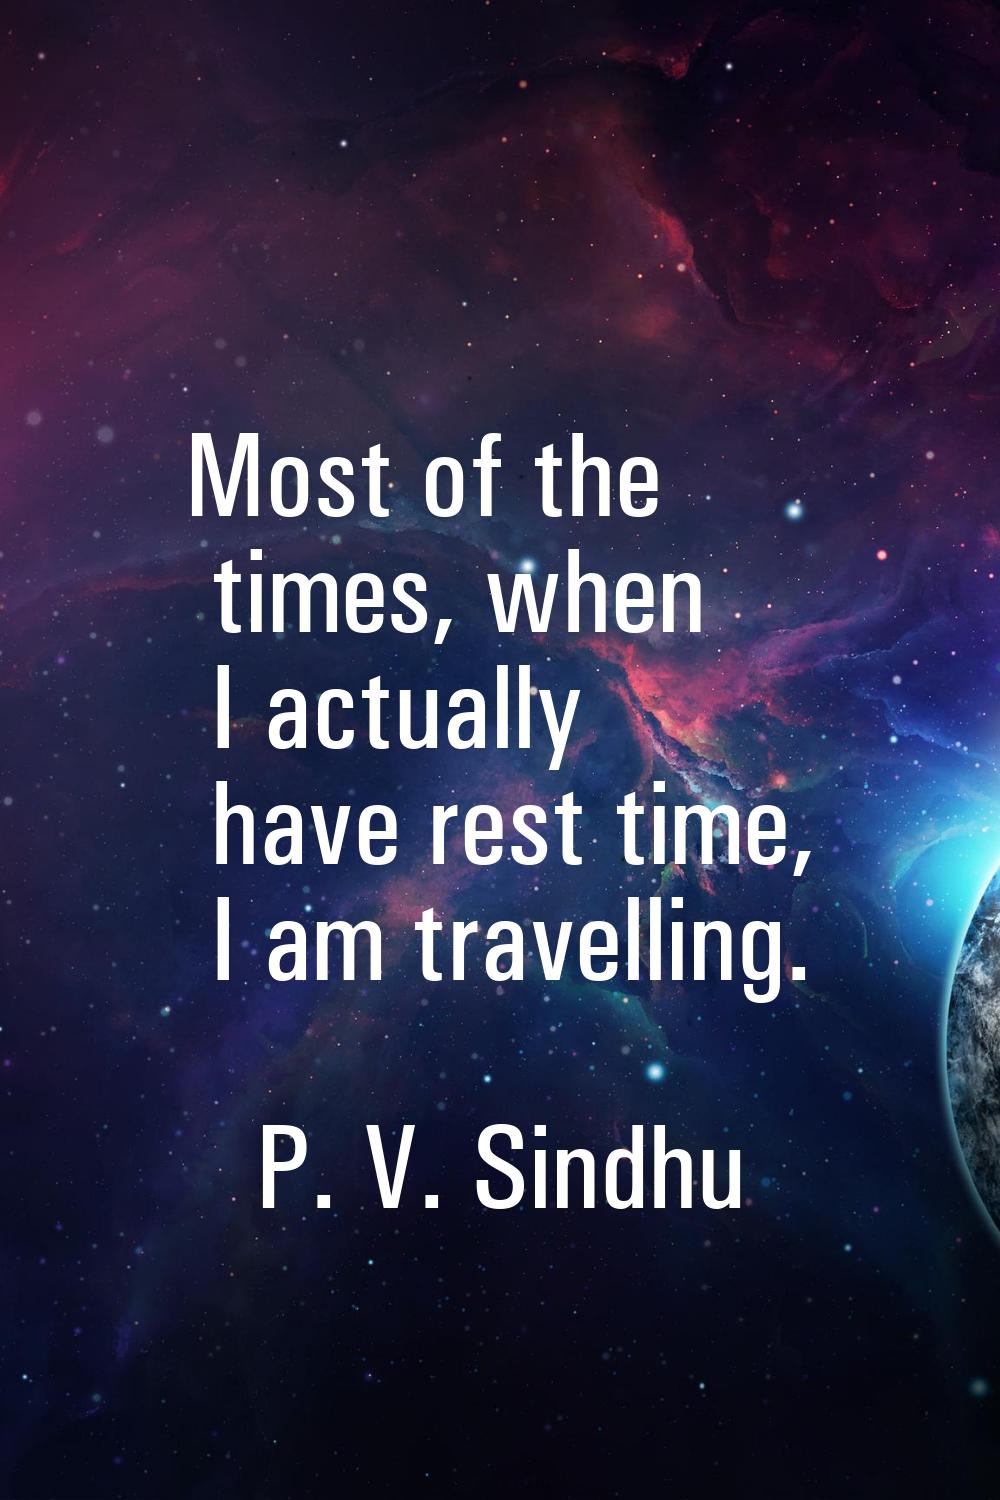 Most of the times, when I actually have rest time, I am travelling.